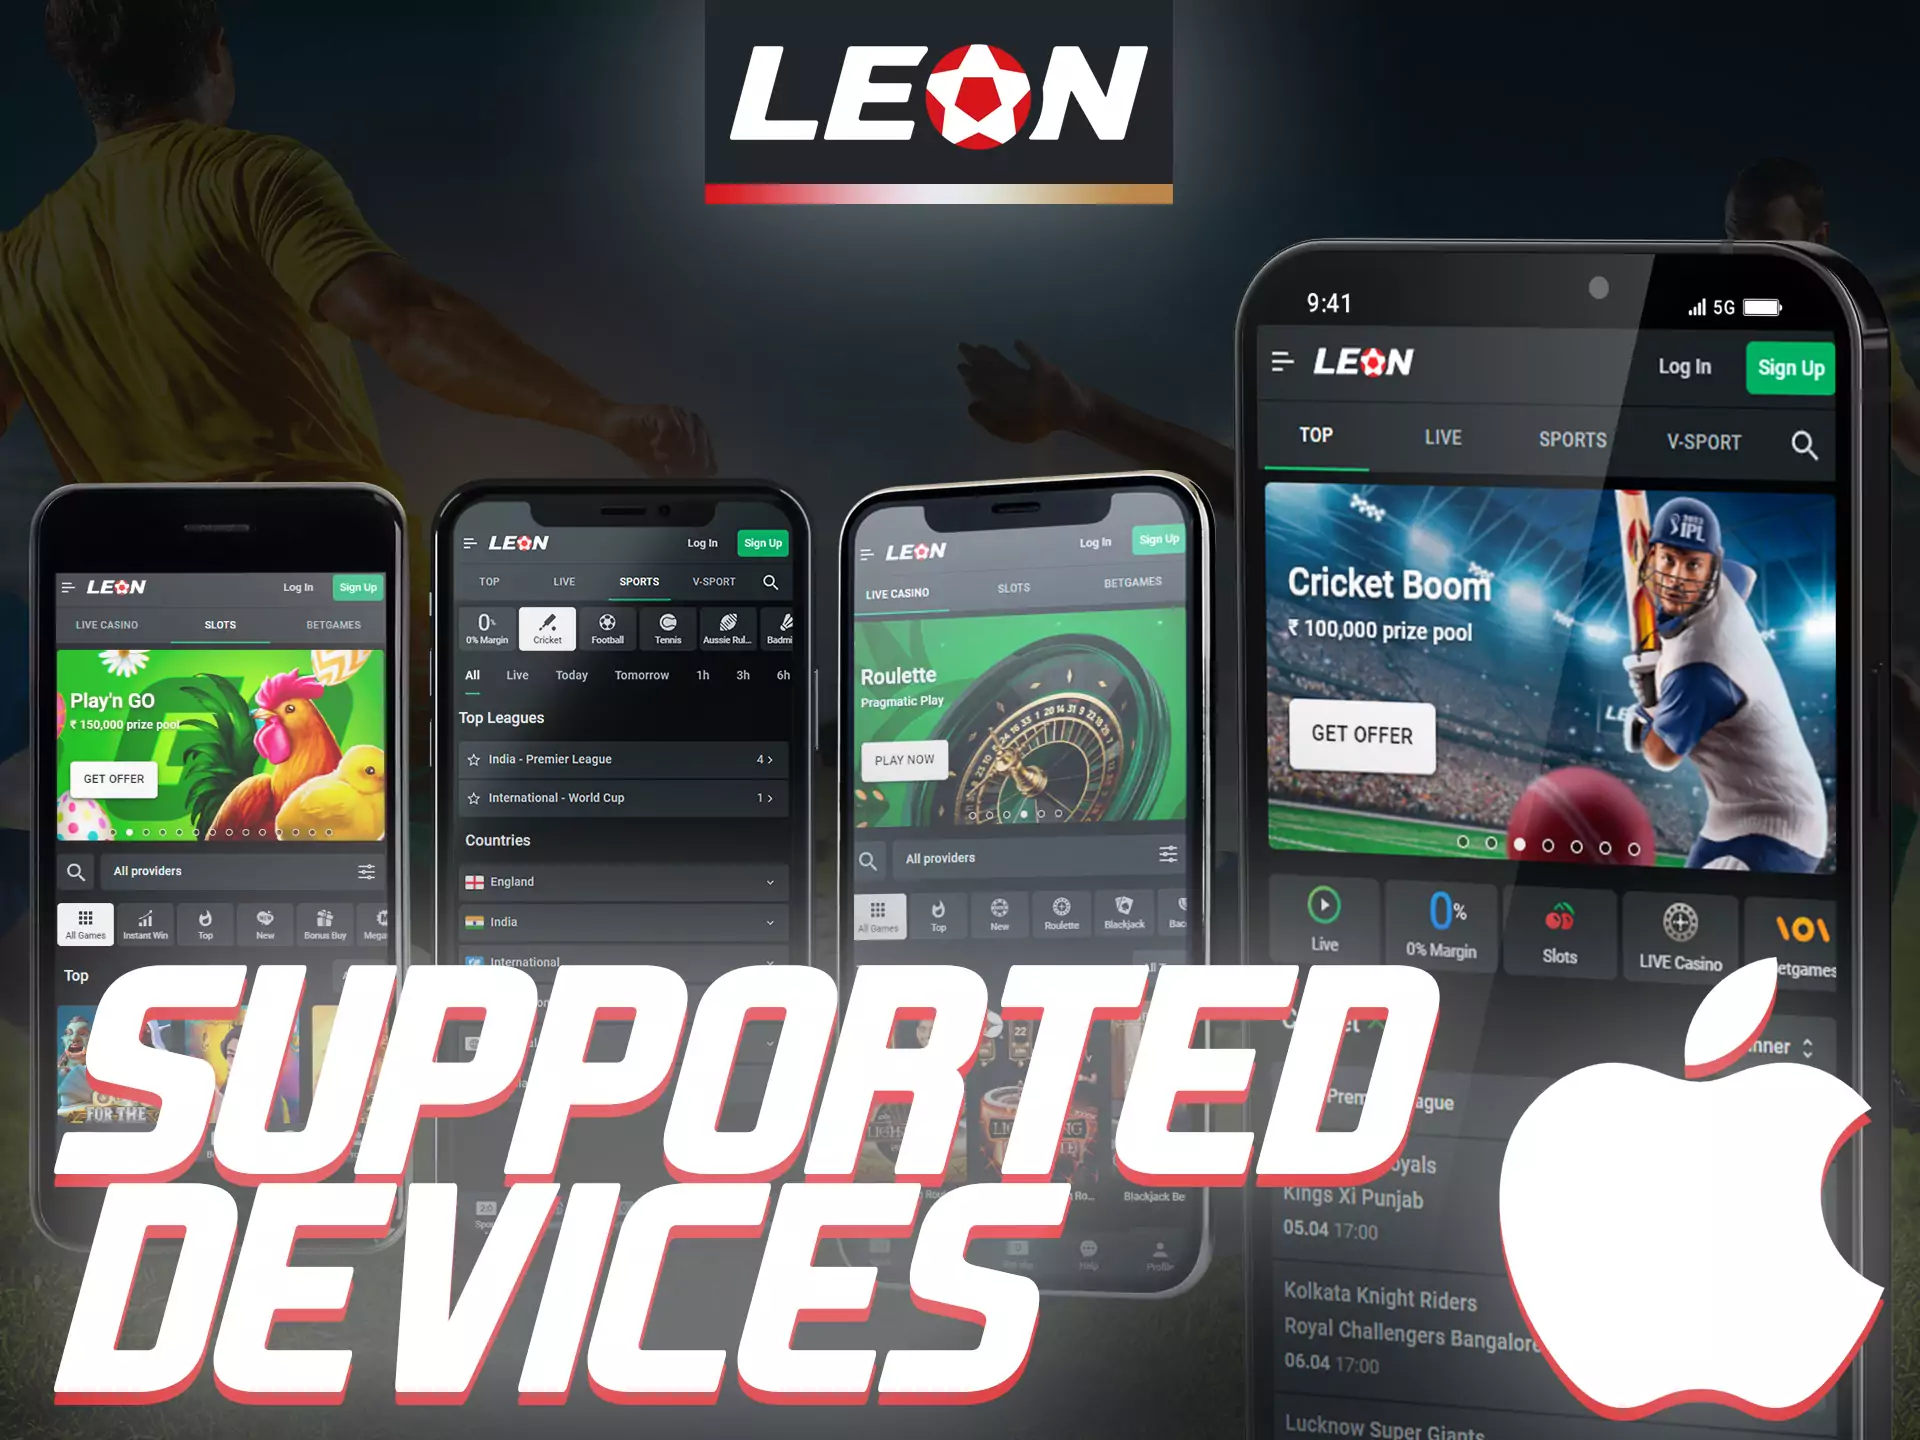 Leonbet app is supported on various iOS devices.